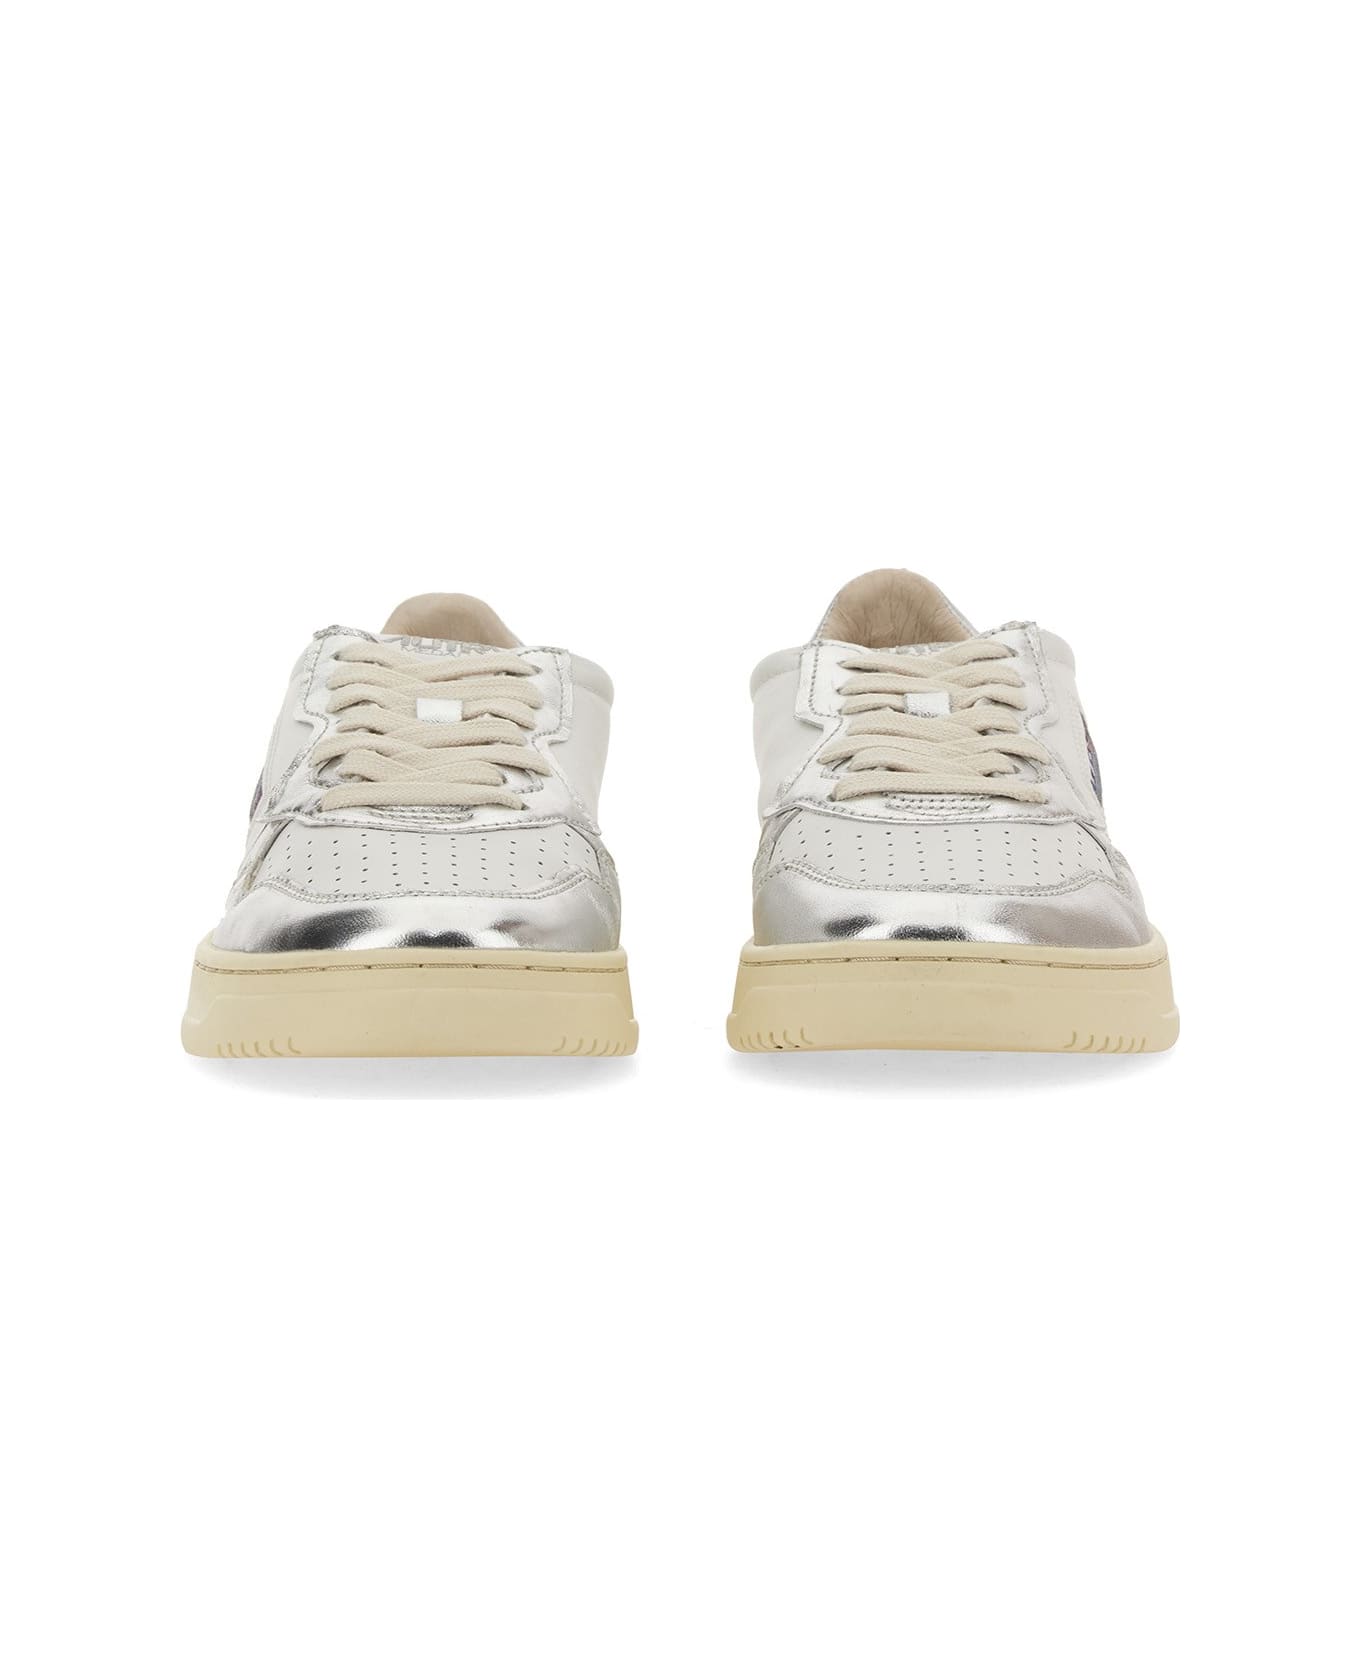 Autry Medalist Low Sneakers - White/silver スニーカー